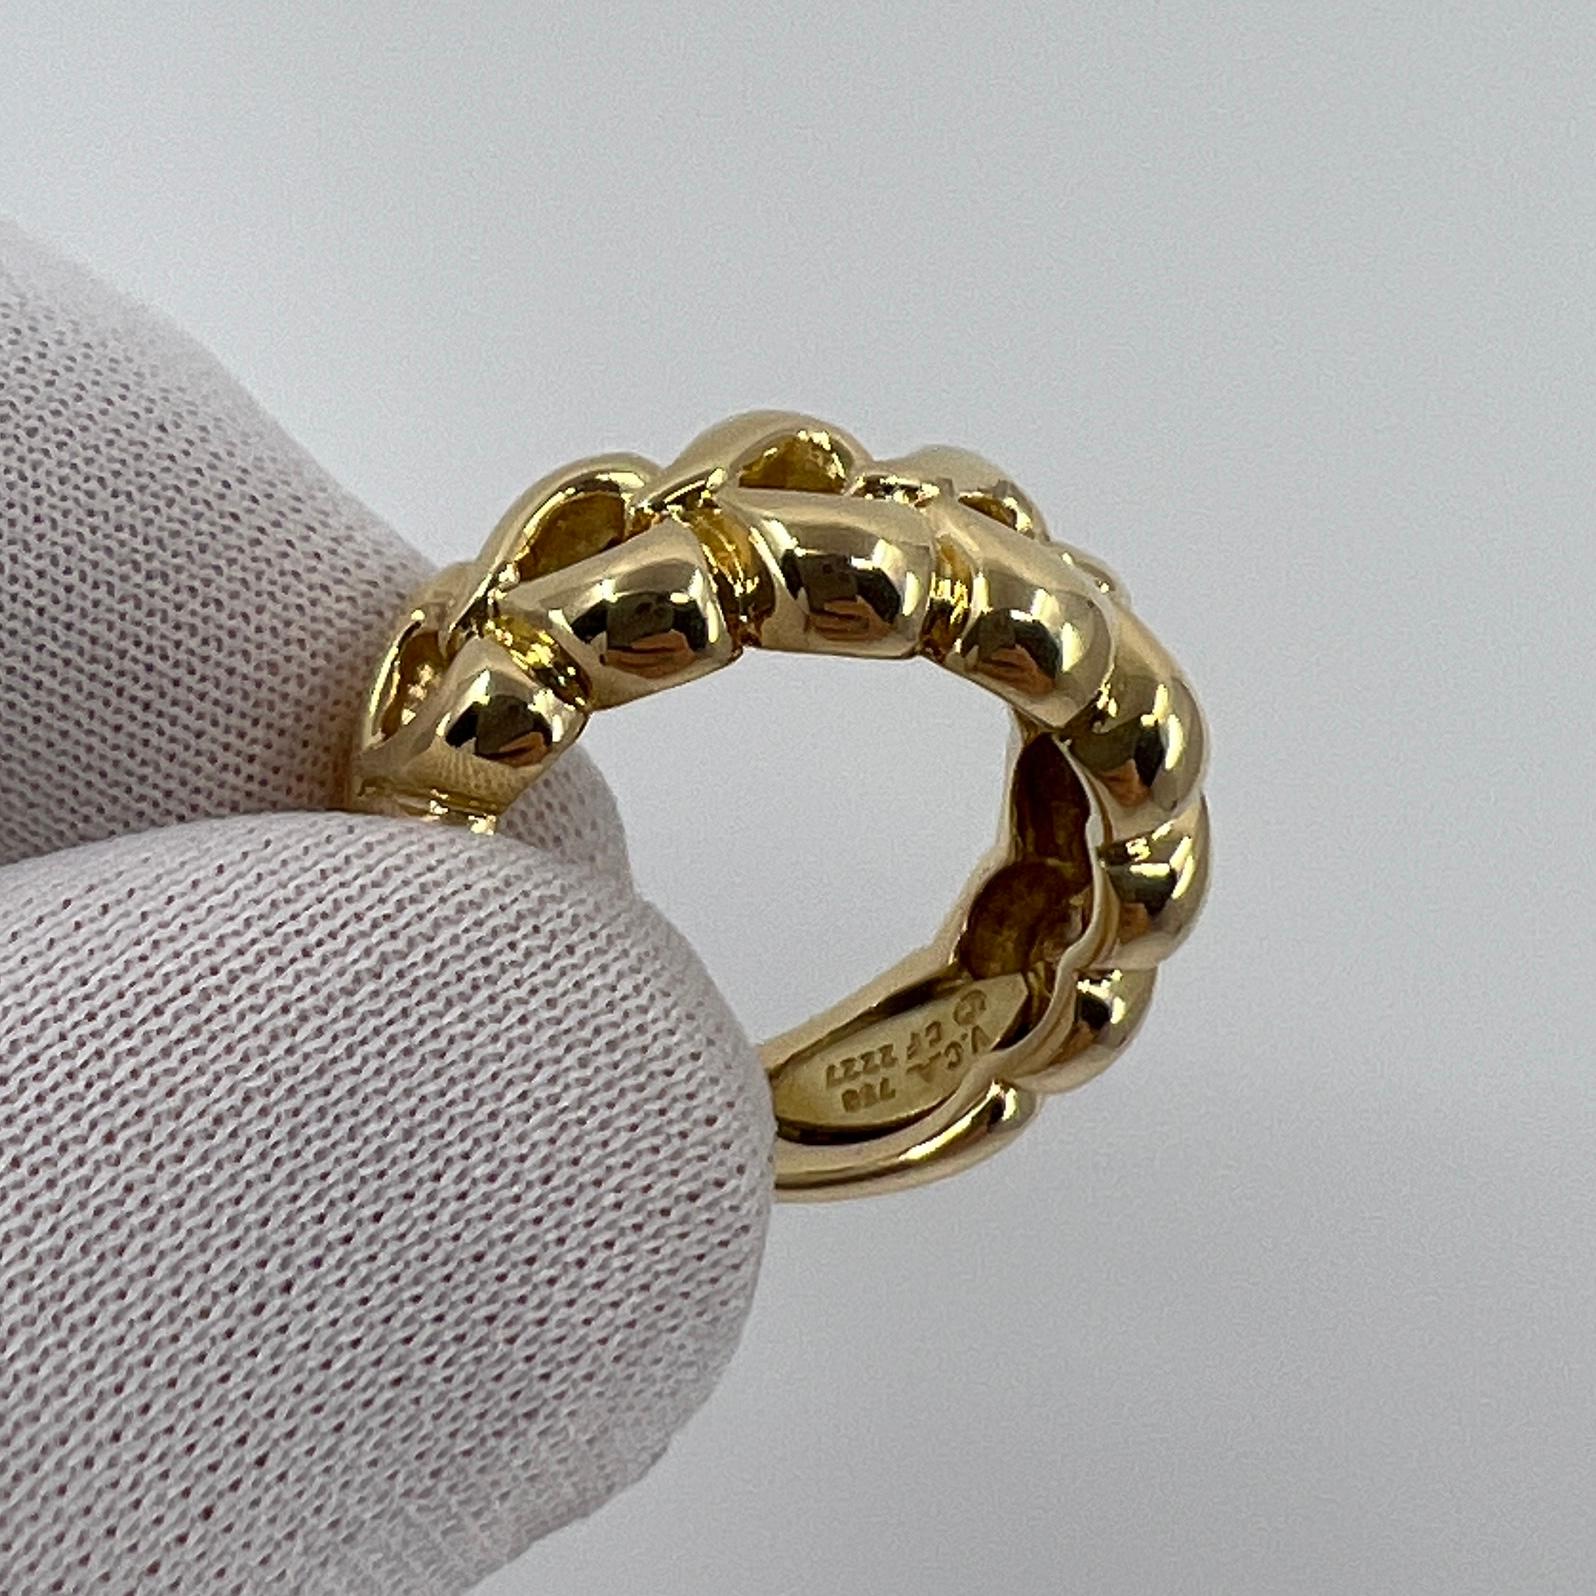 Rare Vintage Van Cleef & Arpels 18k Yellow Gold Open Heart Band Ring with Box For Sale 7